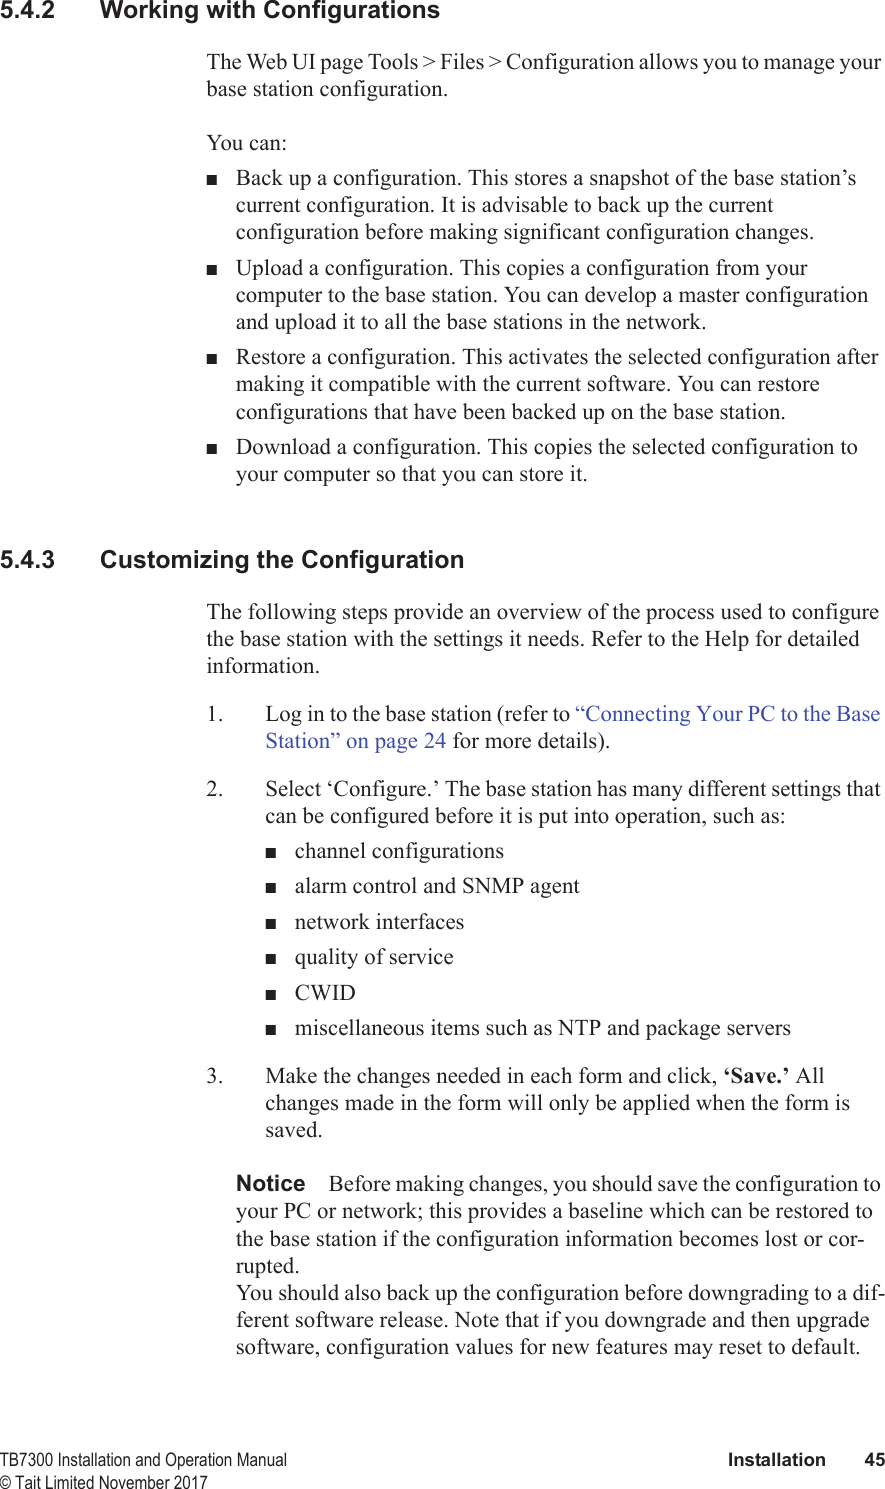  TB7300 Installation and Operation Manual Installation 45© Tait Limited November 20175.4.2 Working with ConfigurationsThe Web UI page Tools &gt; Files &gt; Configuration allows you to manage your base station configuration.You can:■Back up a configuration. This stores a snapshot of the base station’s current configuration. It is advisable to back up the current configuration before making significant configuration changes.■Upload a configuration. This copies a configuration from your computer to the base station. You can develop a master configuration and upload it to all the base stations in the network.■Restore a configuration. This activates the selected configuration after making it compatible with the current software. You can restore configurations that have been backed up on the base station.■Download a configuration. This copies the selected configuration to your computer so that you can store it.5.4.3 Customizing the ConfigurationThe following steps provide an overview of the process used to configure the base station with the settings it needs. Refer to the Help for detailed information.1. Log in to the base station (refer to “Connecting Your PC to the Base Station” on page 24 for more details).2. Select ‘Configure.’ The base station has many different settings that can be configured before it is put into operation, such as:■channel configurations■alarm control and SNMP agent■network interfaces■quality of service■CWID■miscellaneous items such as NTP and package servers3. Make the changes needed in each form and click, ‘Save.’ All changes made in the form will only be applied when the form is saved.Notice Before making changes, you should save the configuration to your PC or network; this provides a baseline which can be restored to the base station if the configuration information becomes lost or cor-rupted. You should also back up the configuration before downgrading to a dif-ferent software release. Note that if you downgrade and then upgrade software, configuration values for new features may reset to default.